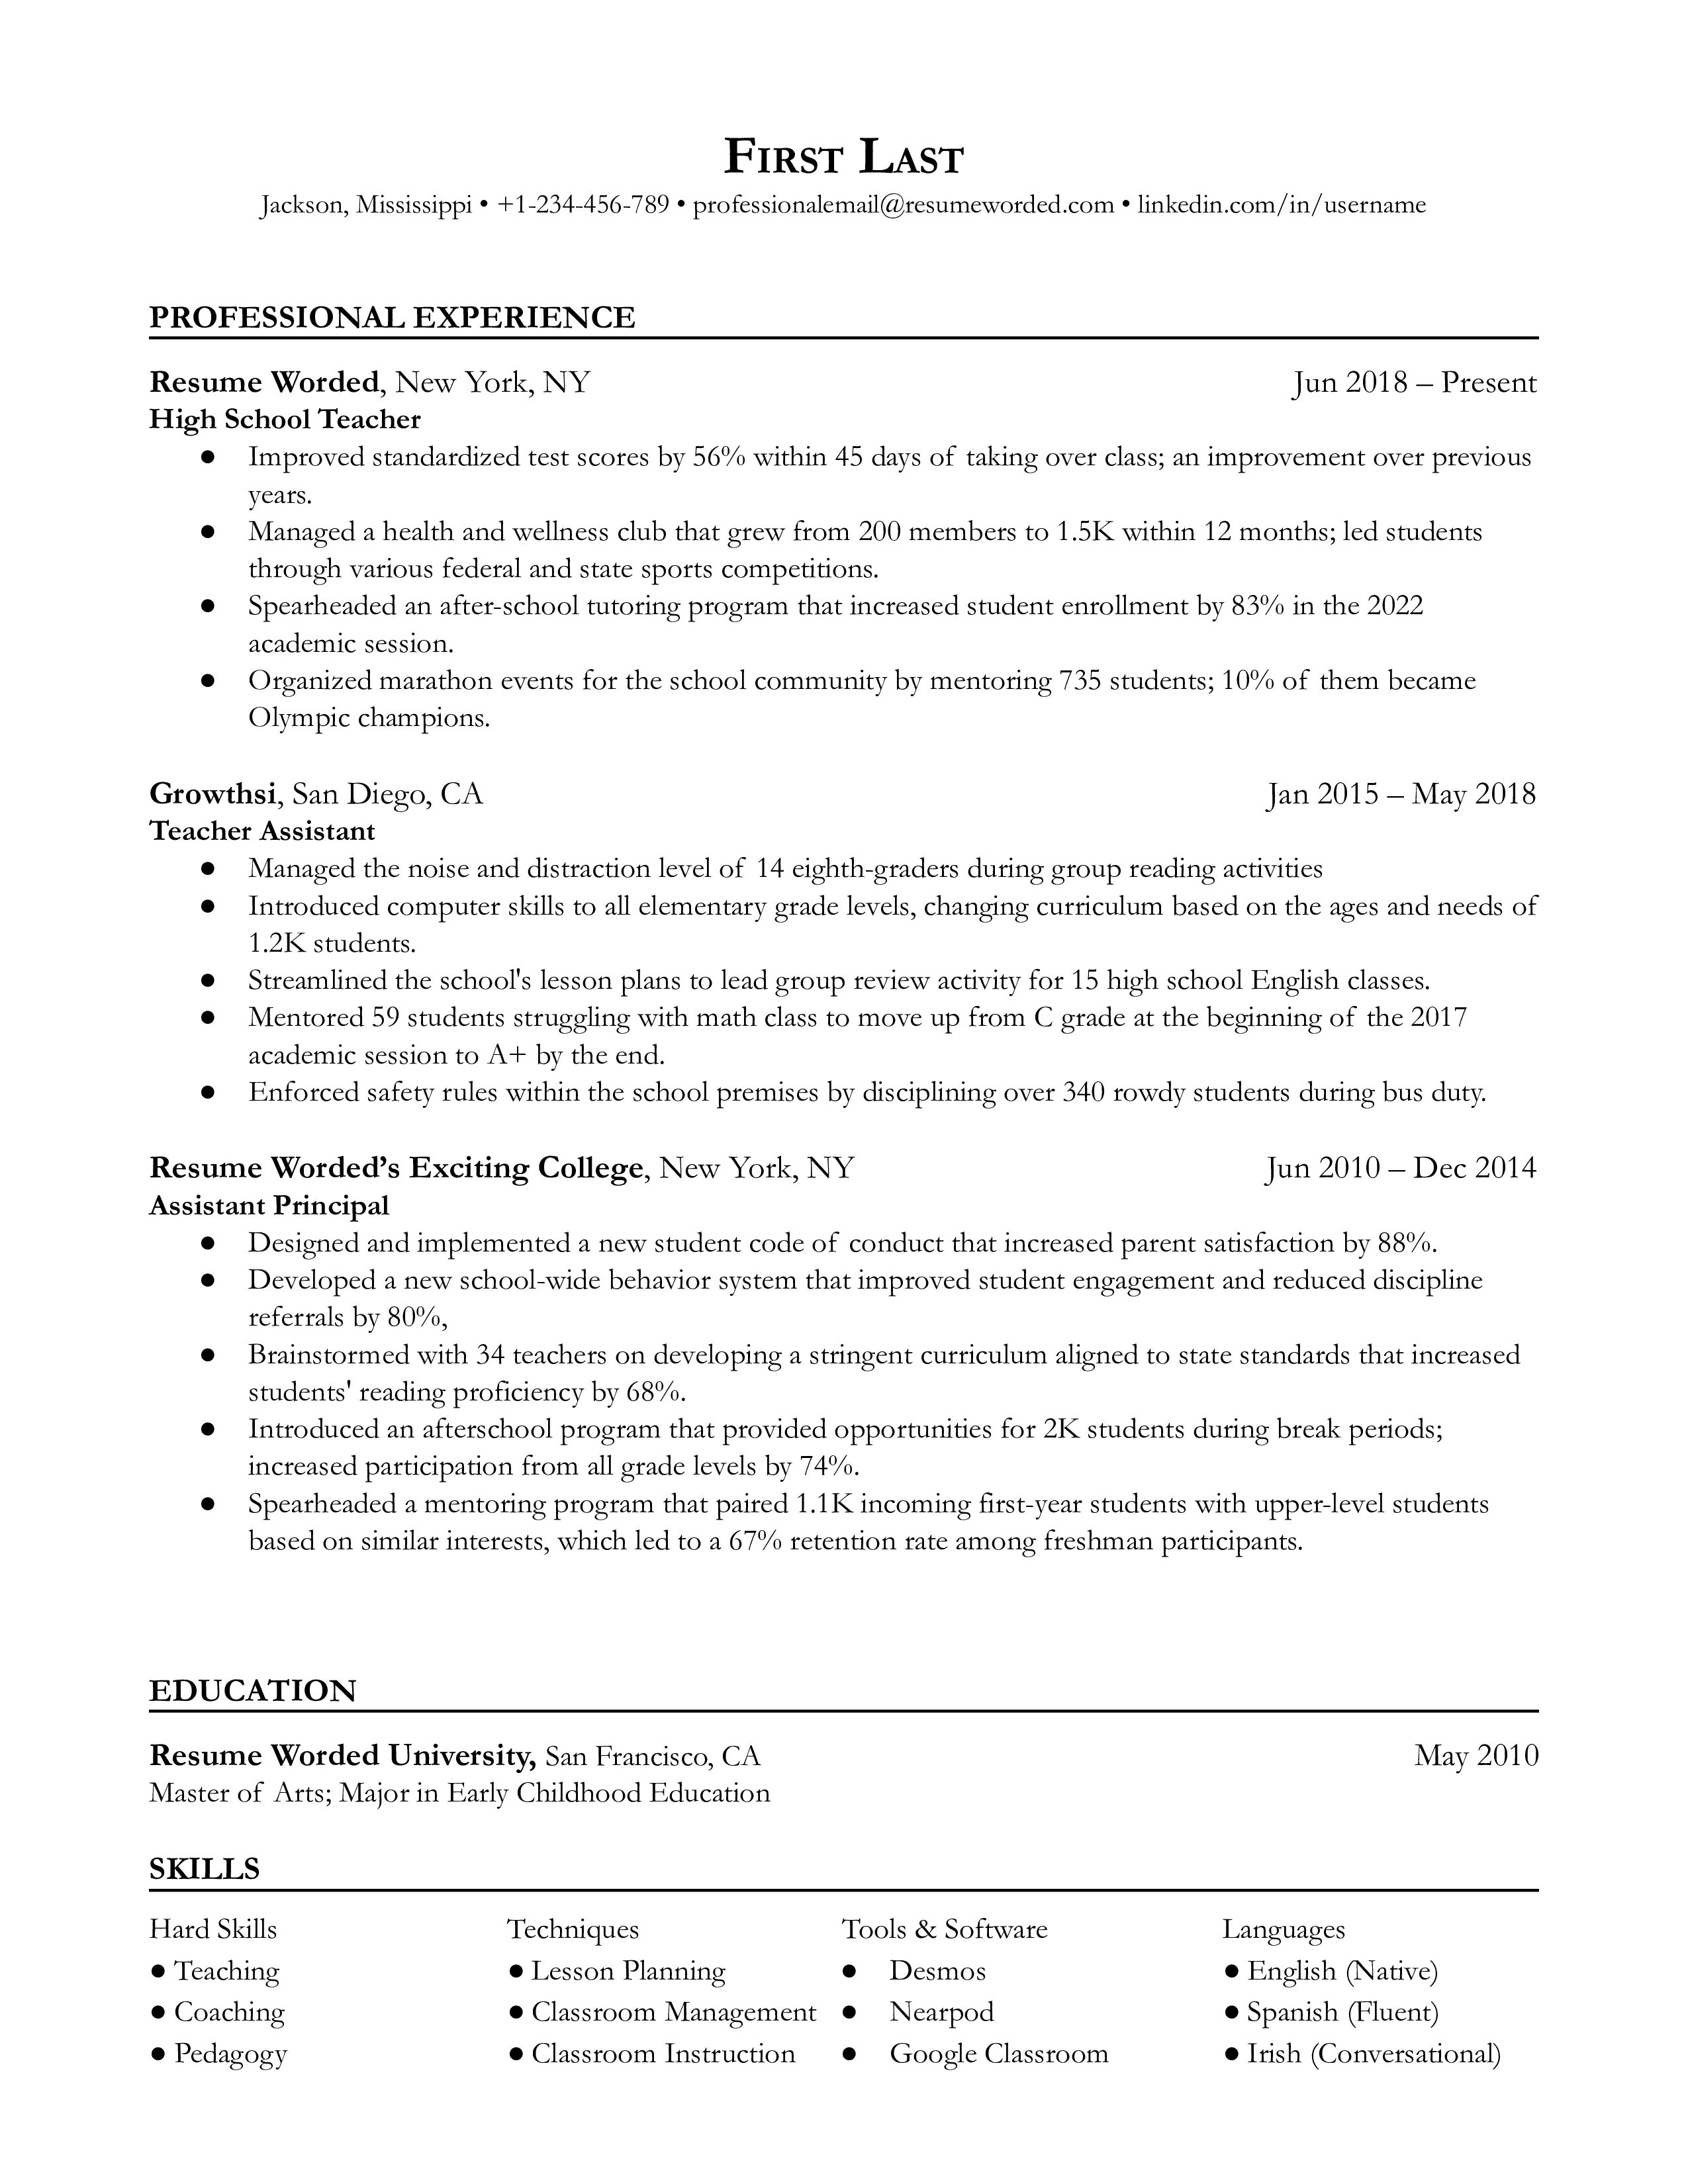 A high school teacher resume sample that highlights the applicant’s specialization and experience.